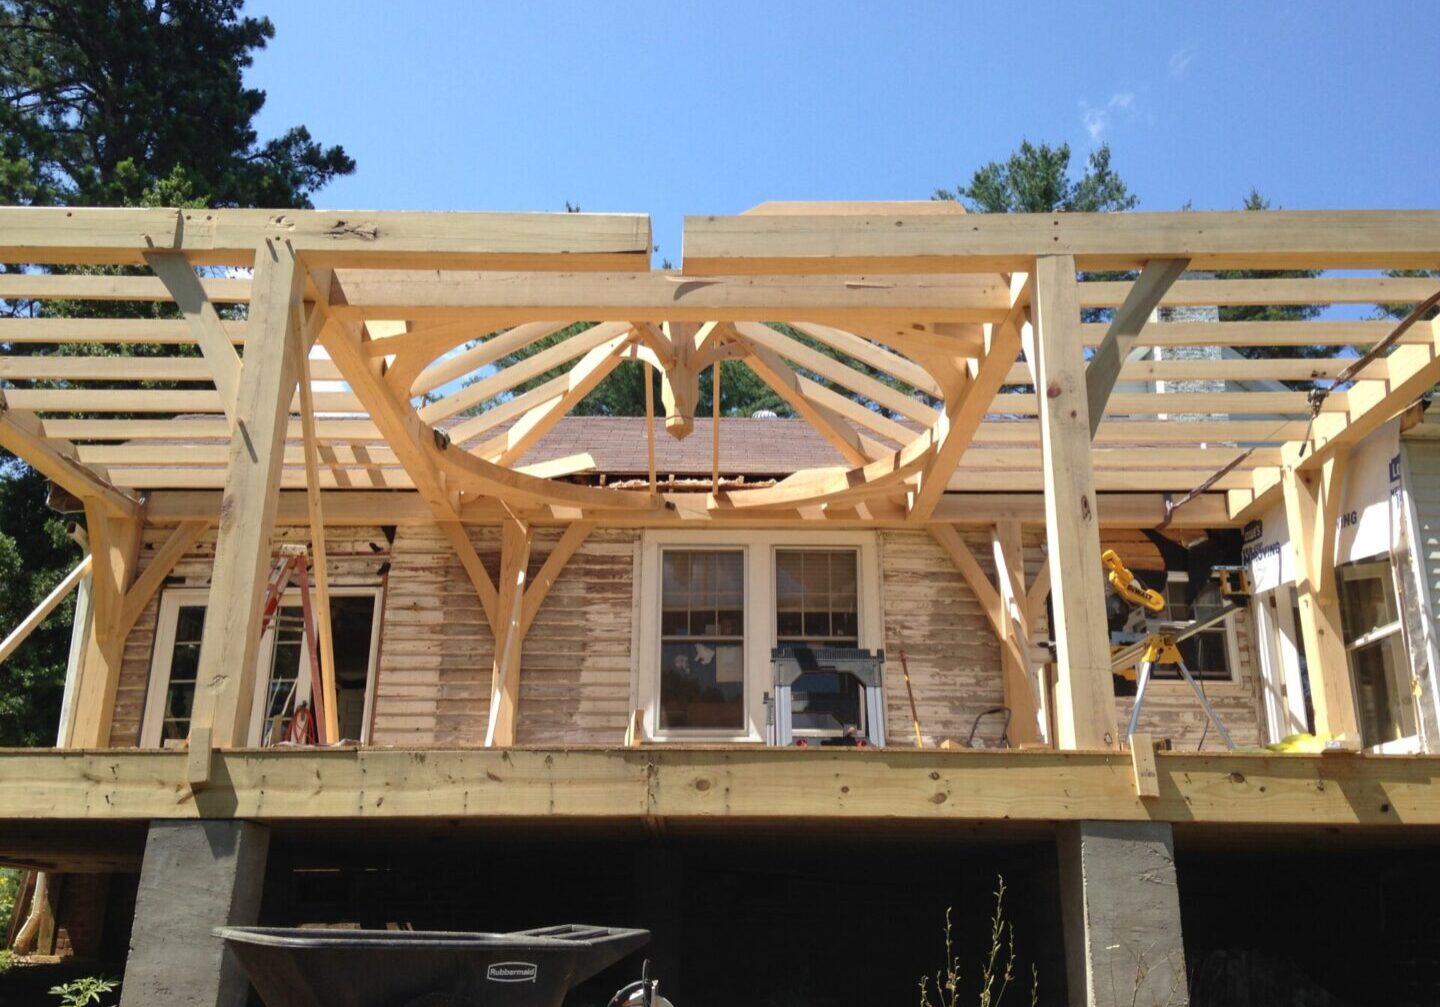 South Carolina Historic Home Addition build in a timber framed style - Hygge Contruction Charleston